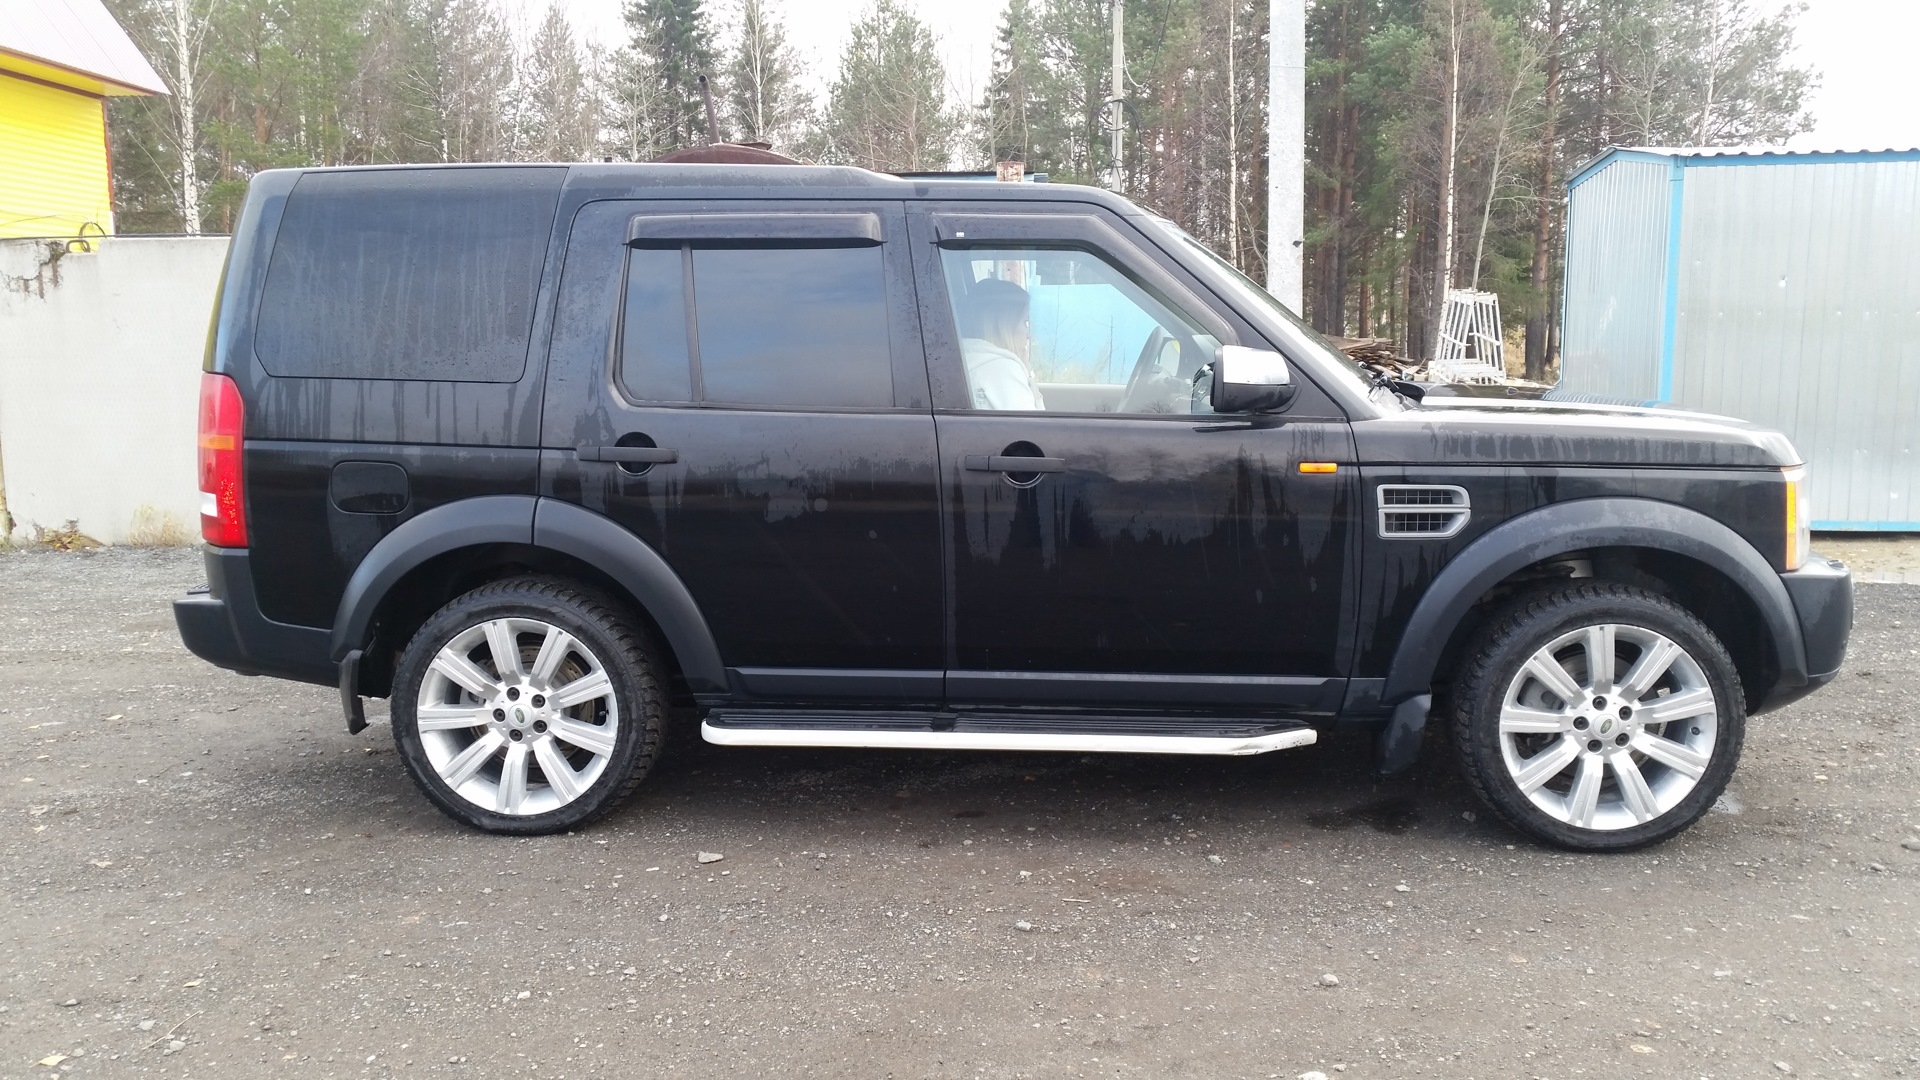 Колеса дискавери 3. Land Rover Discovery 4 r20. Land Rover Discovery r20. Discovery 3 r20. Land Rover Discovery 3 r20.